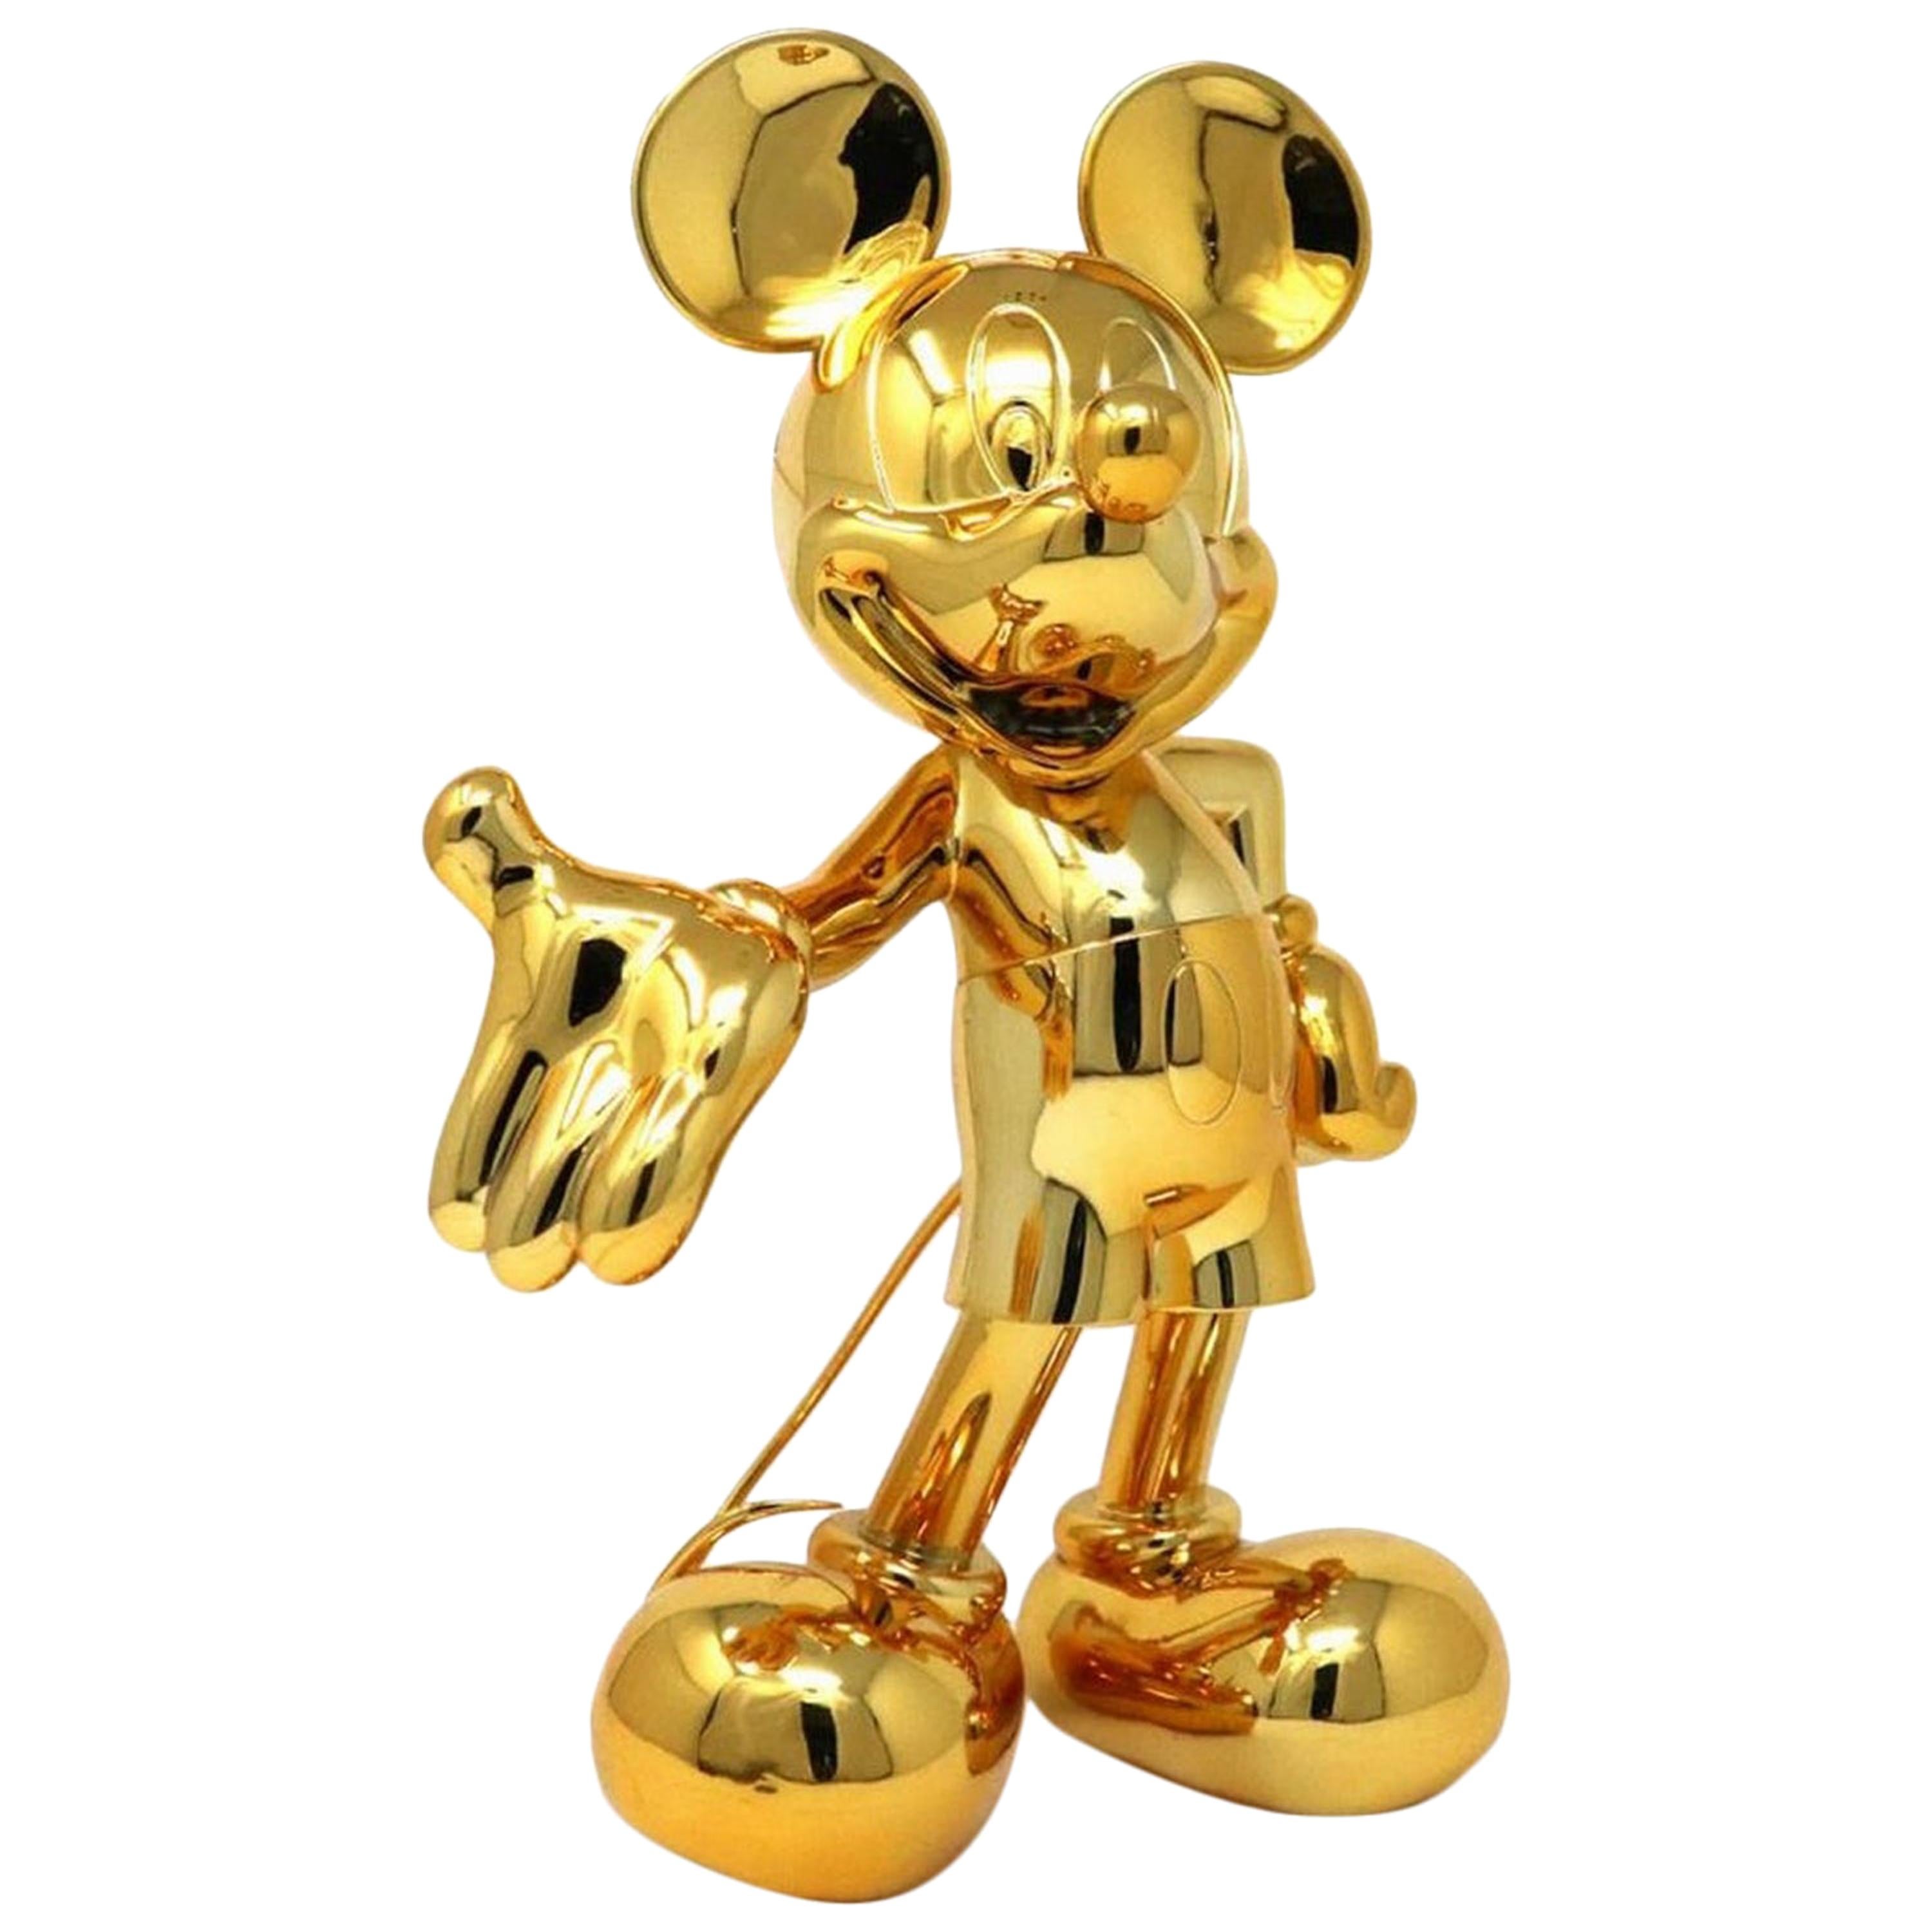 In Stock in Los Angeles, Mickey Mouse Metallic Chrome Gold, Pop Figurine